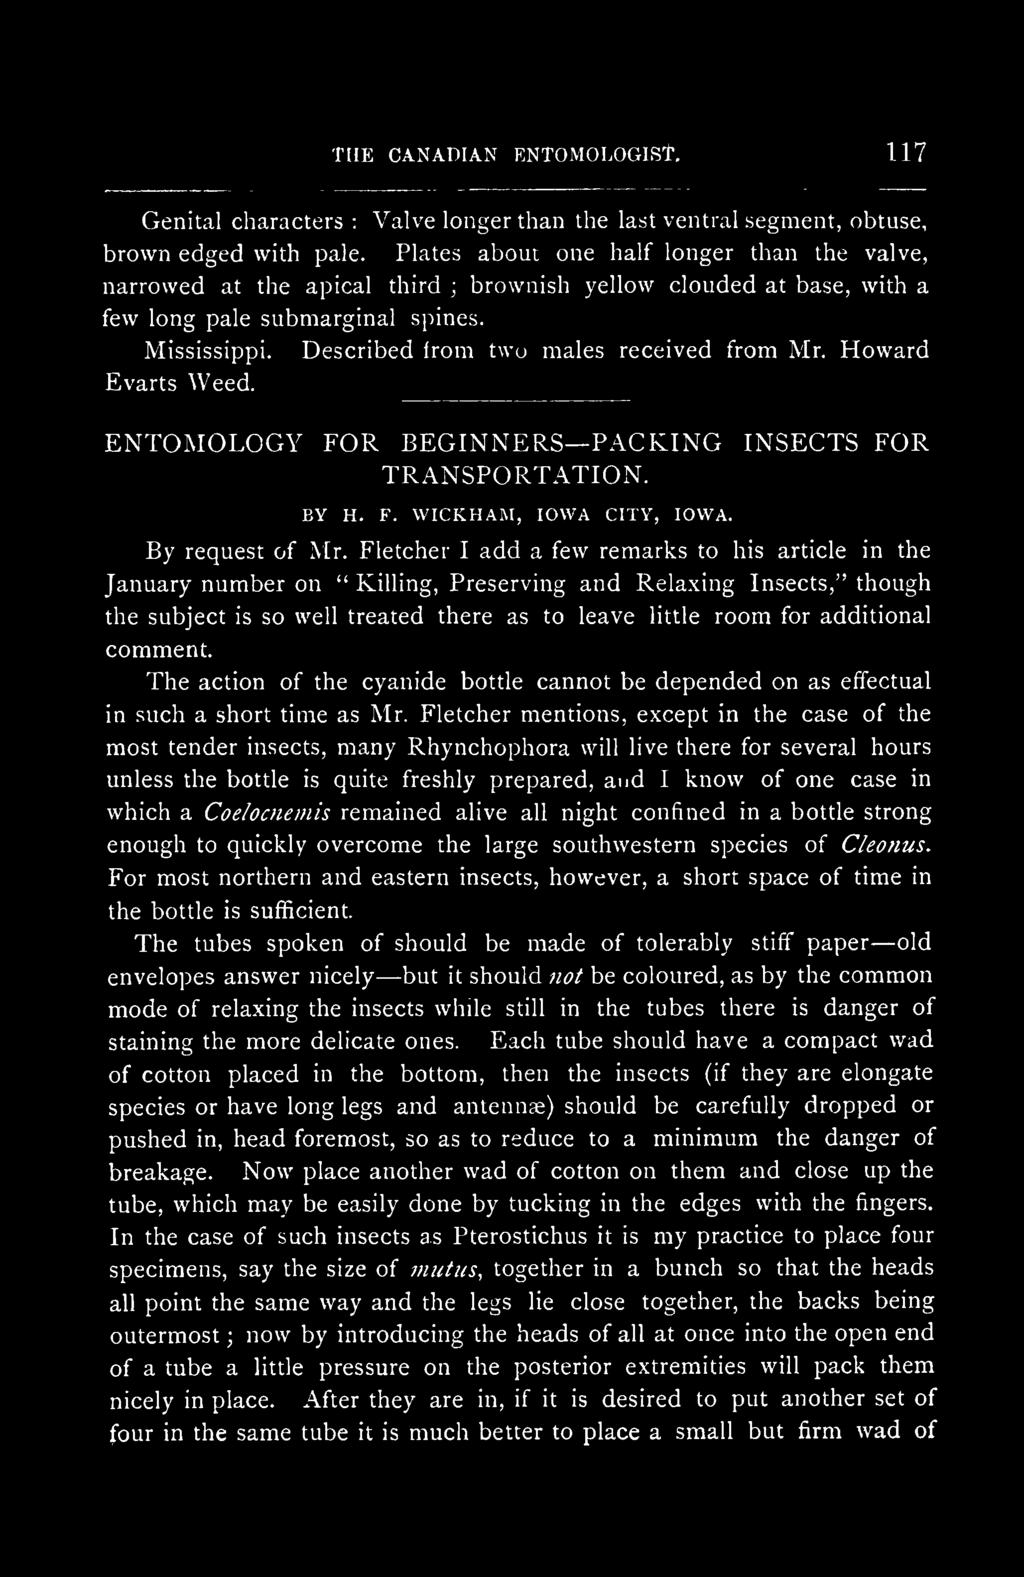 Described Irom two males received from Mr. Howard Evarts Weed. ENTOMOLOGY FOR BEGINNERS PACKING INSECTS FOR TRANSPORTATION. BY H. F. WICKHAM, IOWA CITY, IOWA. By request of Mr.